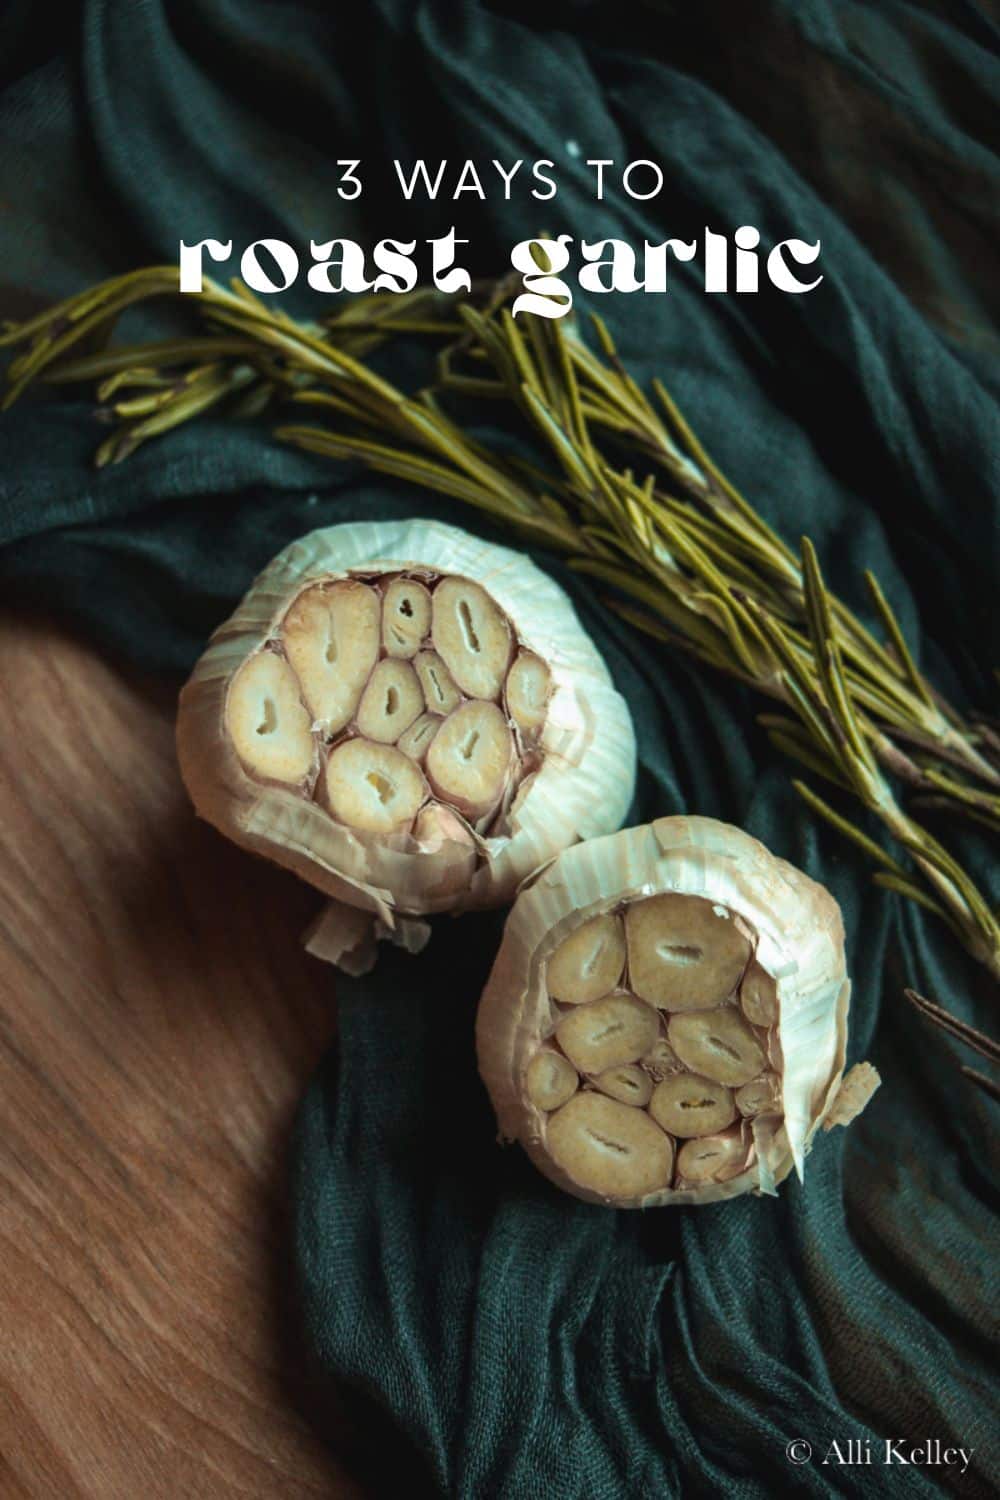 Garlic is just one of those irresistible flavors - it's intense yet sweet and earthy all at the same time. And when roasted, it takes on a fantastic flavor that is simply irresistible. Plus, when you know how to roast garlic at home, you can add this delicious ingredient to all sorts of recipes.